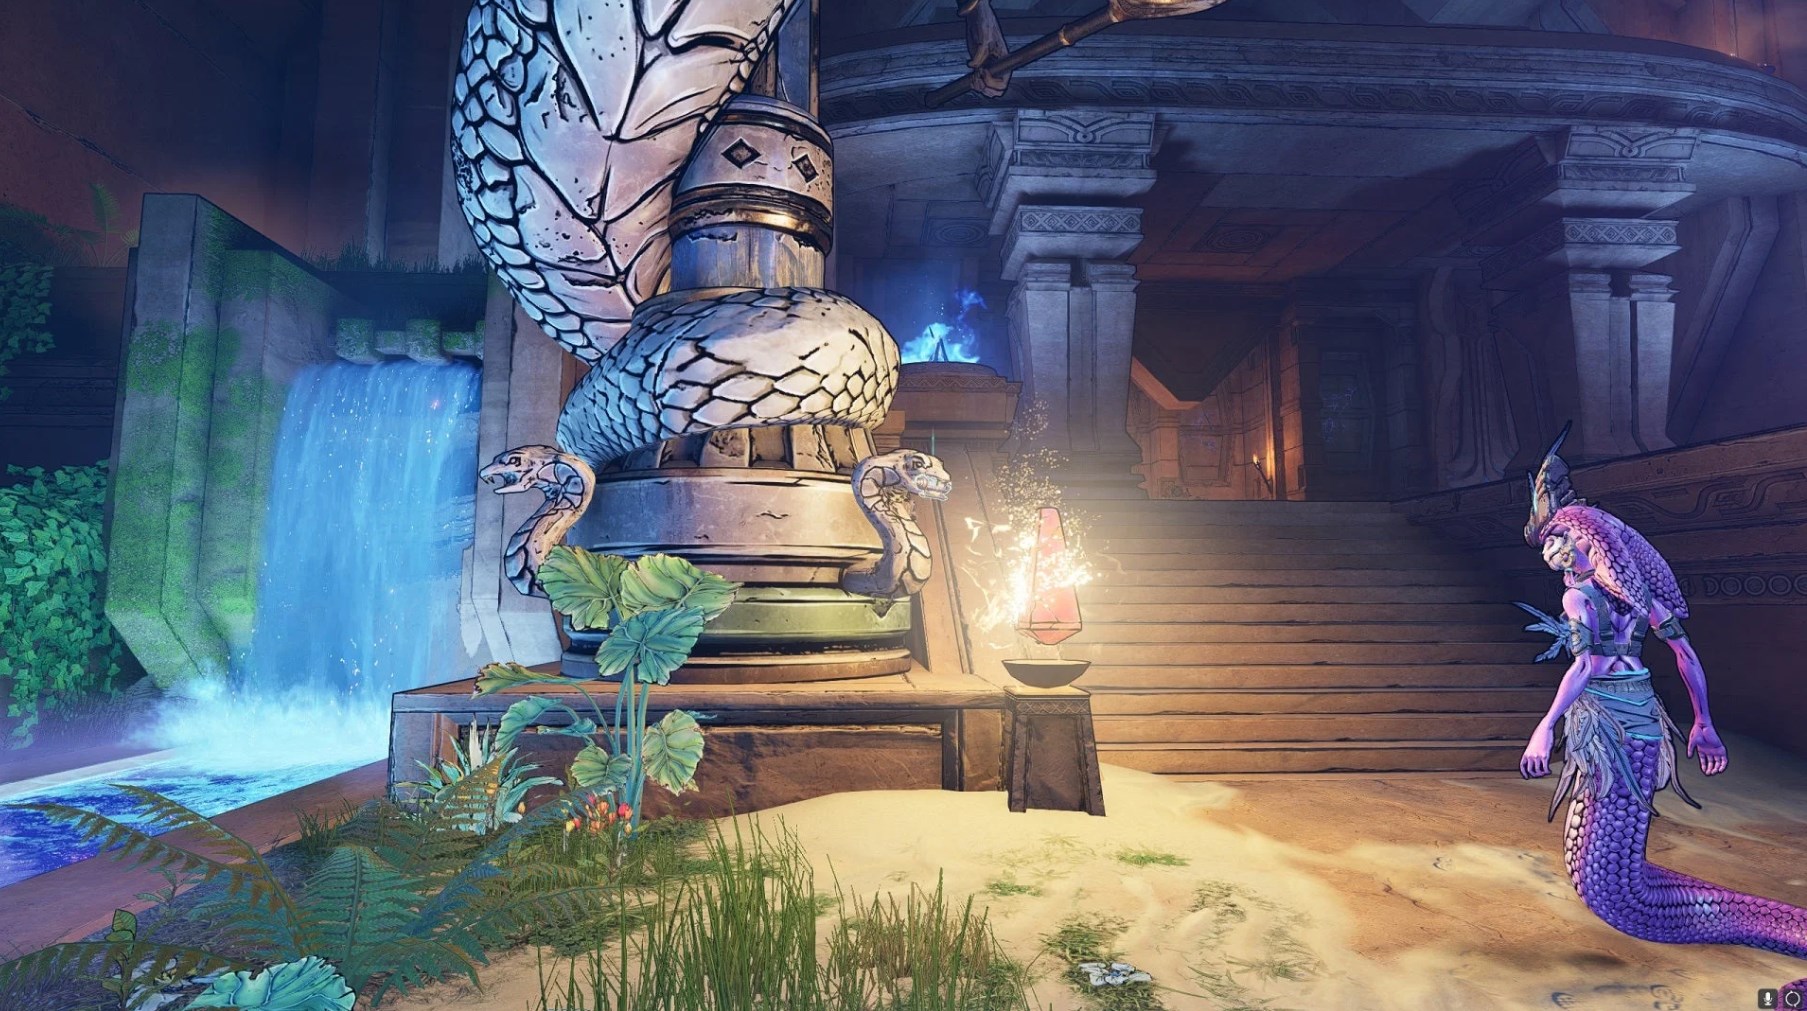 Tiny Tina's Wonderlands How to Get All Lore Scrolls Location - Sunfang Oasis Scroll Locations - DDE08EC